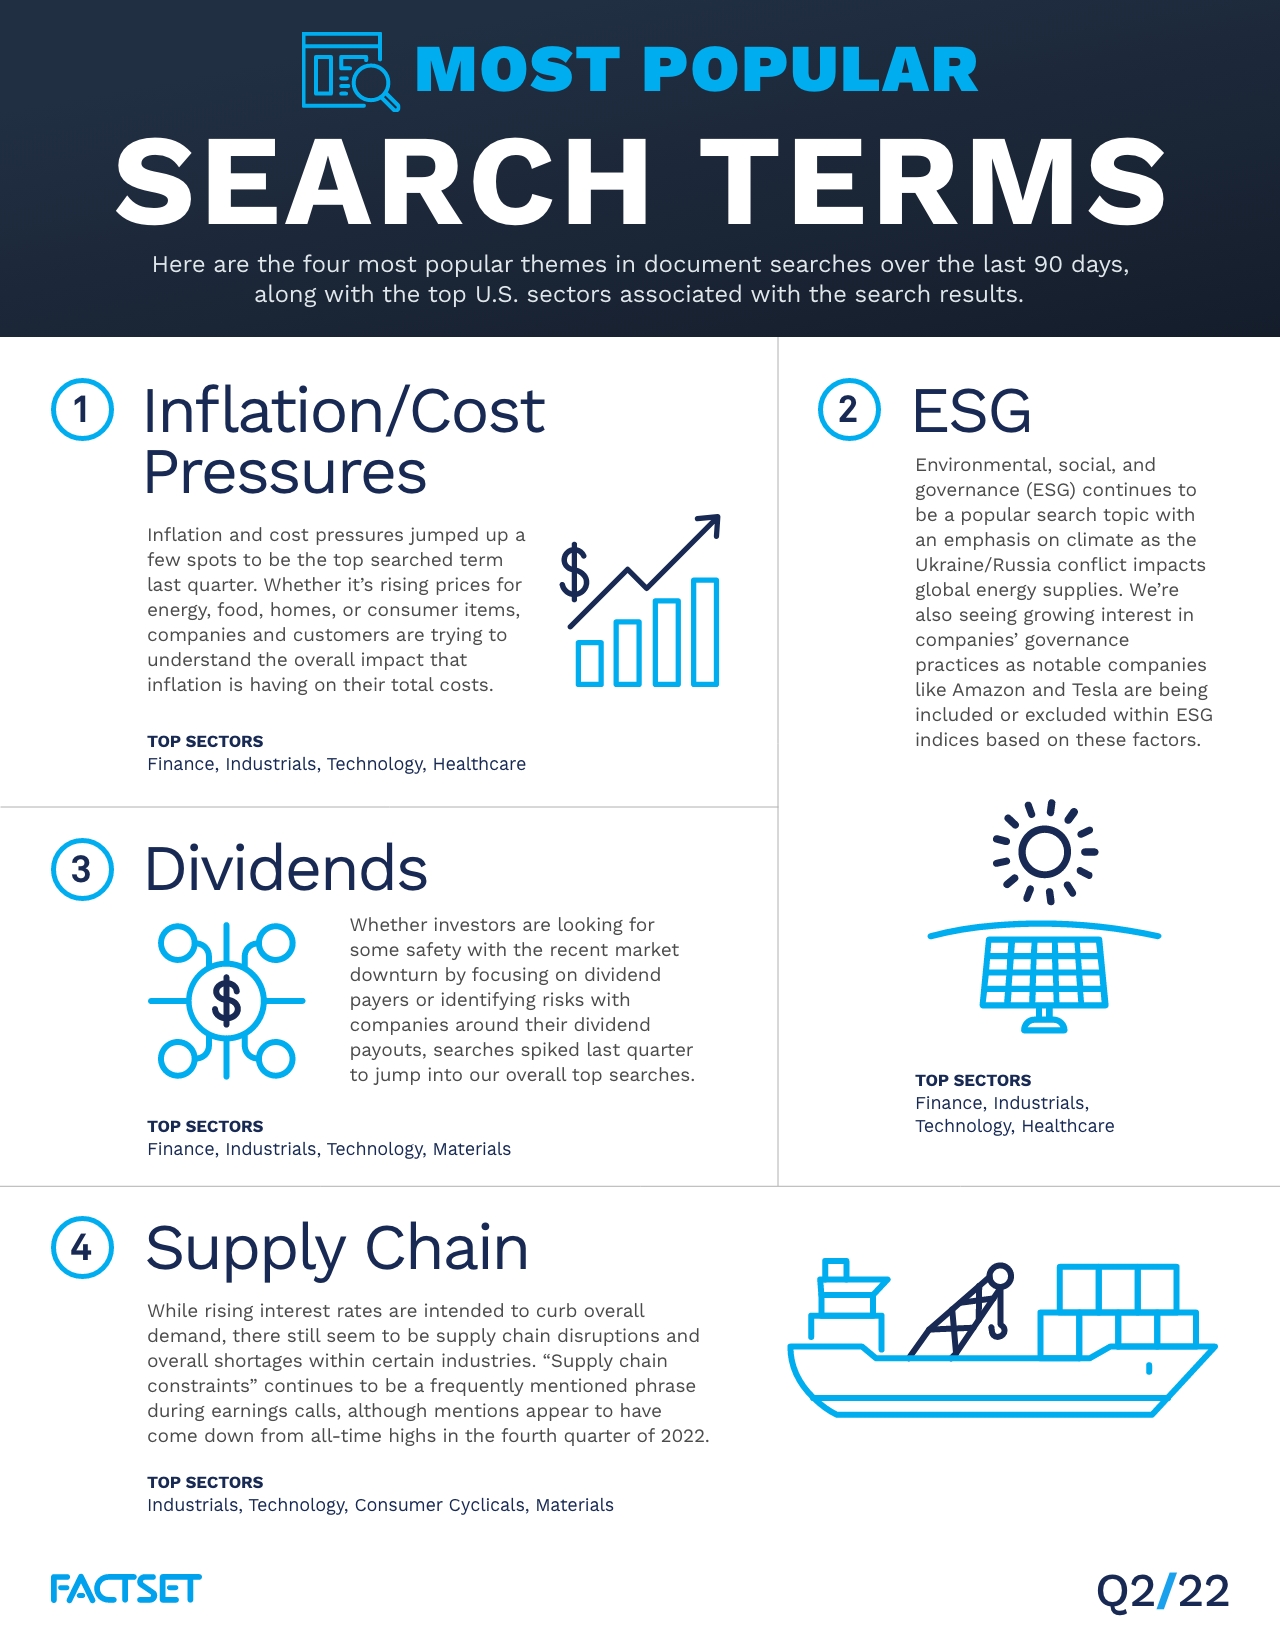 07.14.2022_Smart_Search_Infographic_Q2